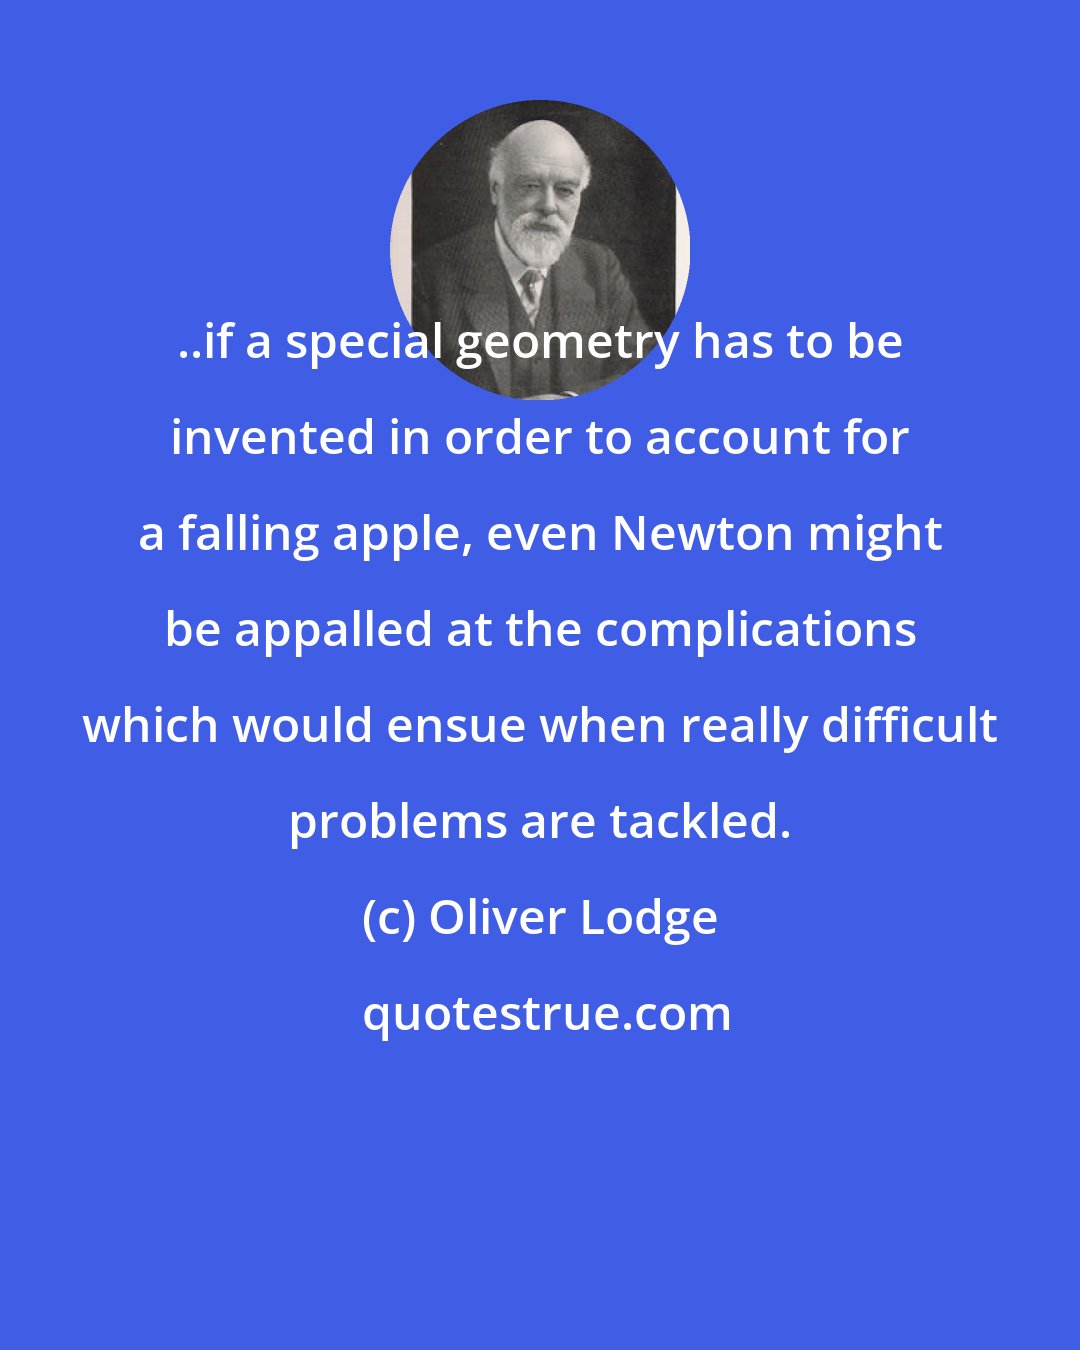 Oliver Lodge: ..if a special geometry has to be invented in order to account for a falling apple, even Newton might be appalled at the complications which would ensue when really difficult problems are tackled.